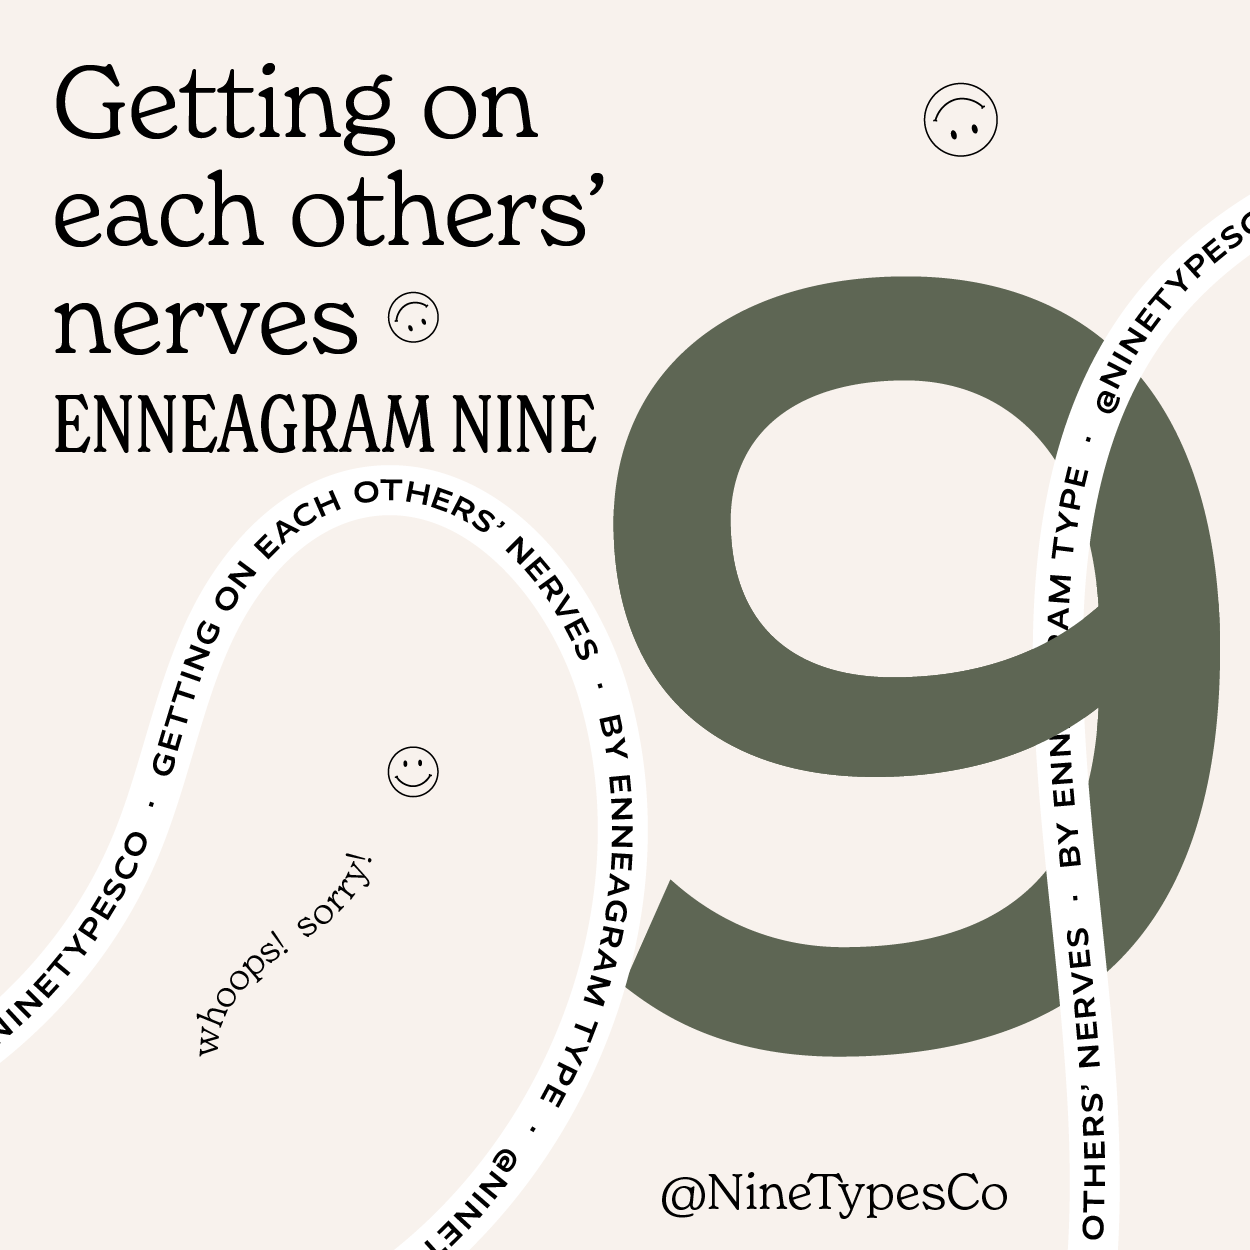 Getting on each others’ nerves by Enneagram TypeEnneagram 9@0.5x.png